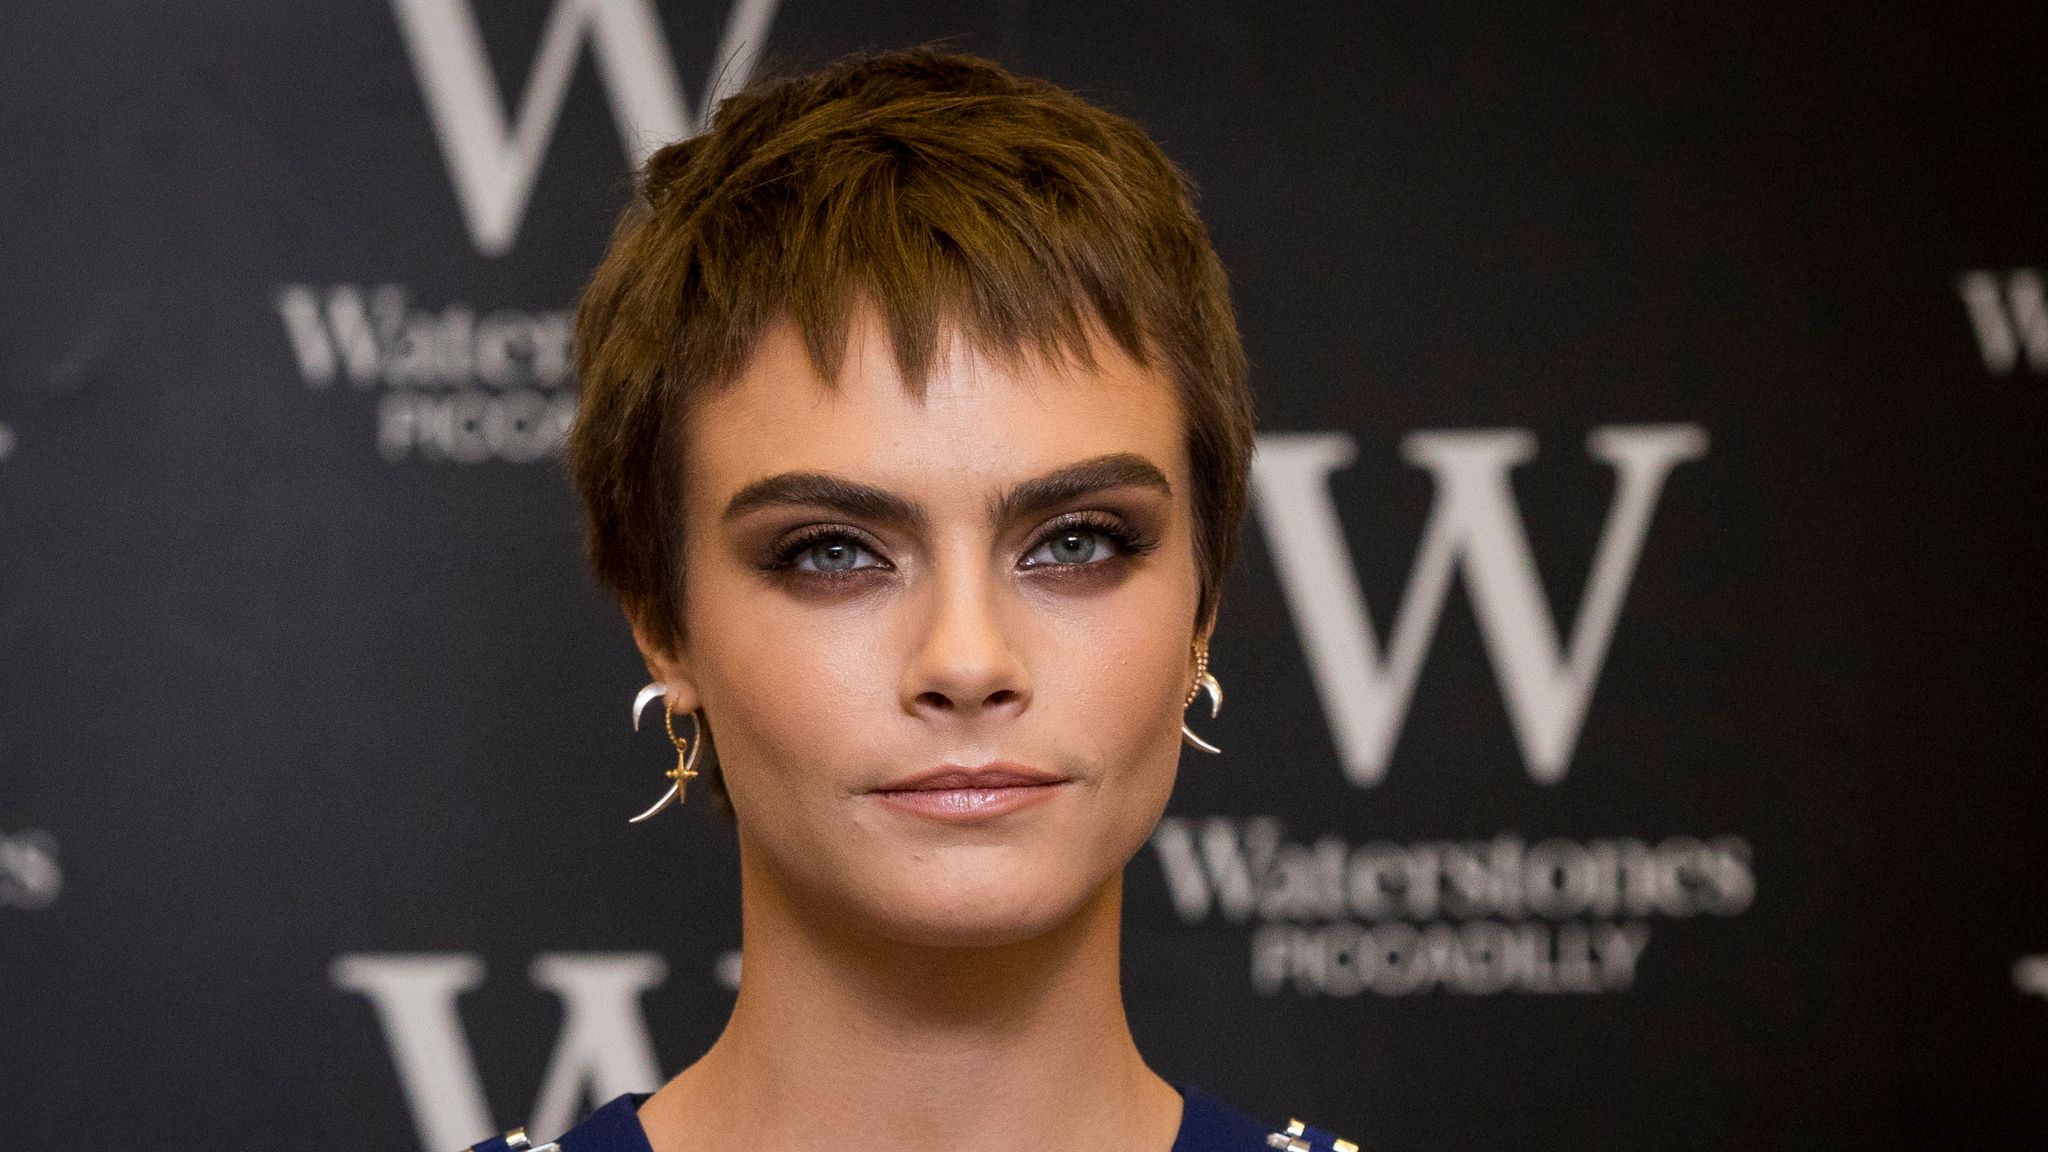 Cara Delevingne reveals why she waited to speak up about sexual abuse